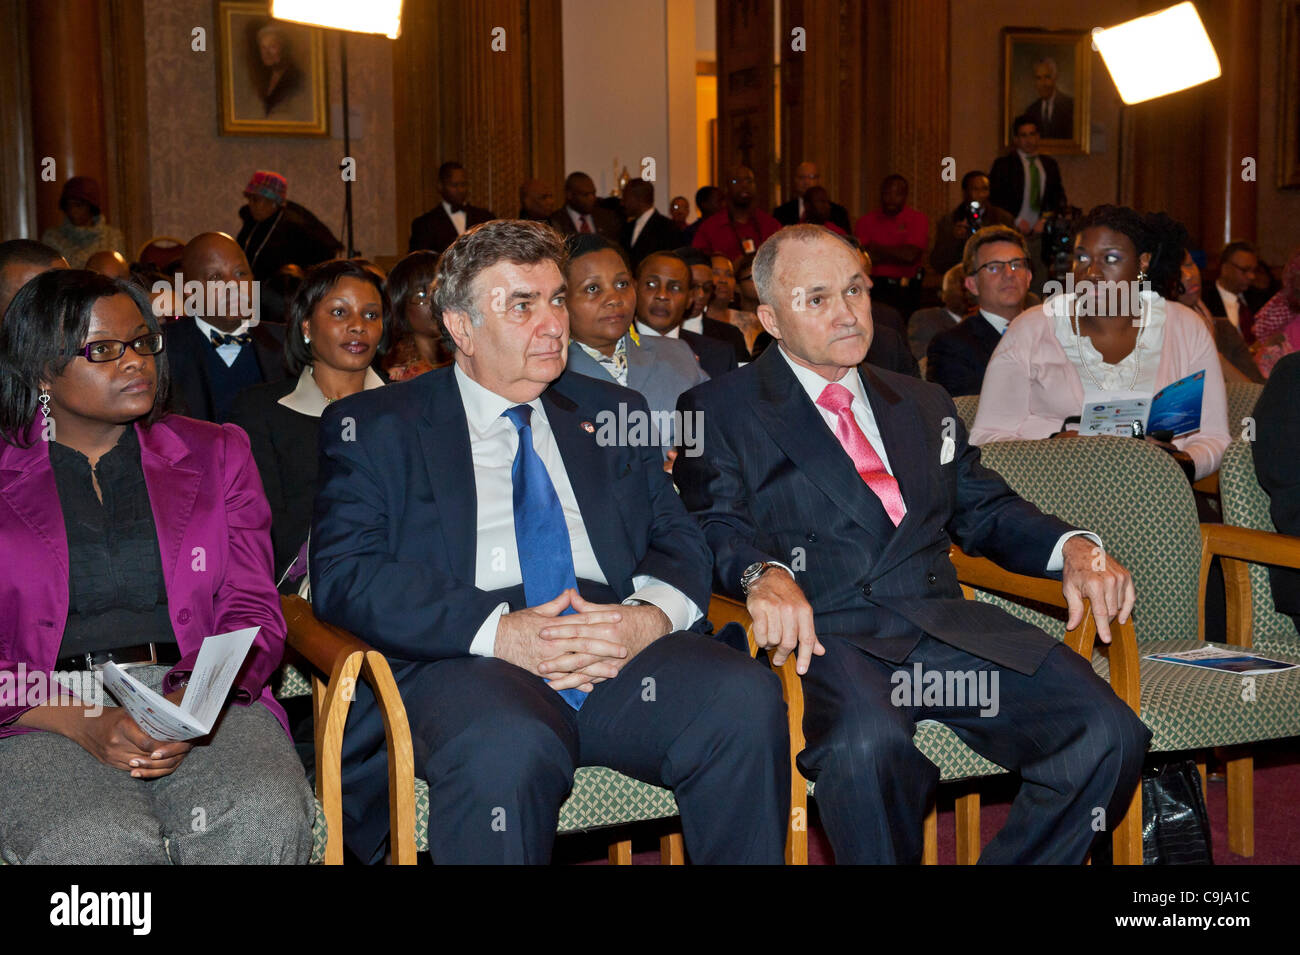 January 11, 2012 - Brooklyn, New York, USA: NYPD New York City Police Commissioner Ray Kelly (front row, right) Keynote Speaker of 2nd Annual Interfaith Memorial Service for Haiti, Wednesday night at Brooklyn Borough Hall, NYC. Stock Photo